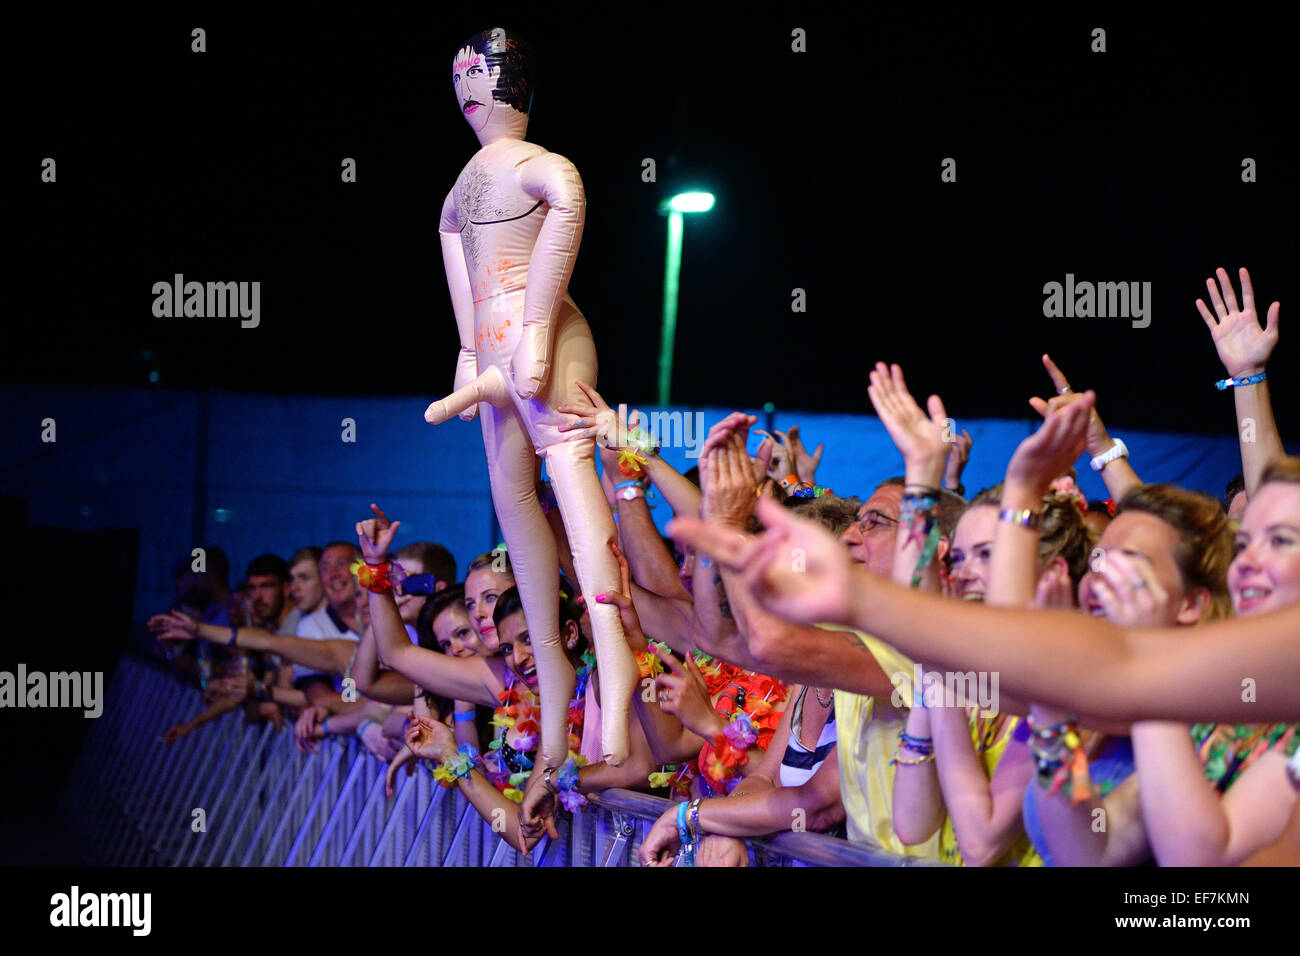 BENICASSIM, SPAIN - JULY 20: Crowd in a concert at FIB Festival on July 20, 2014 in Benicassim, Spain. Stock Photo